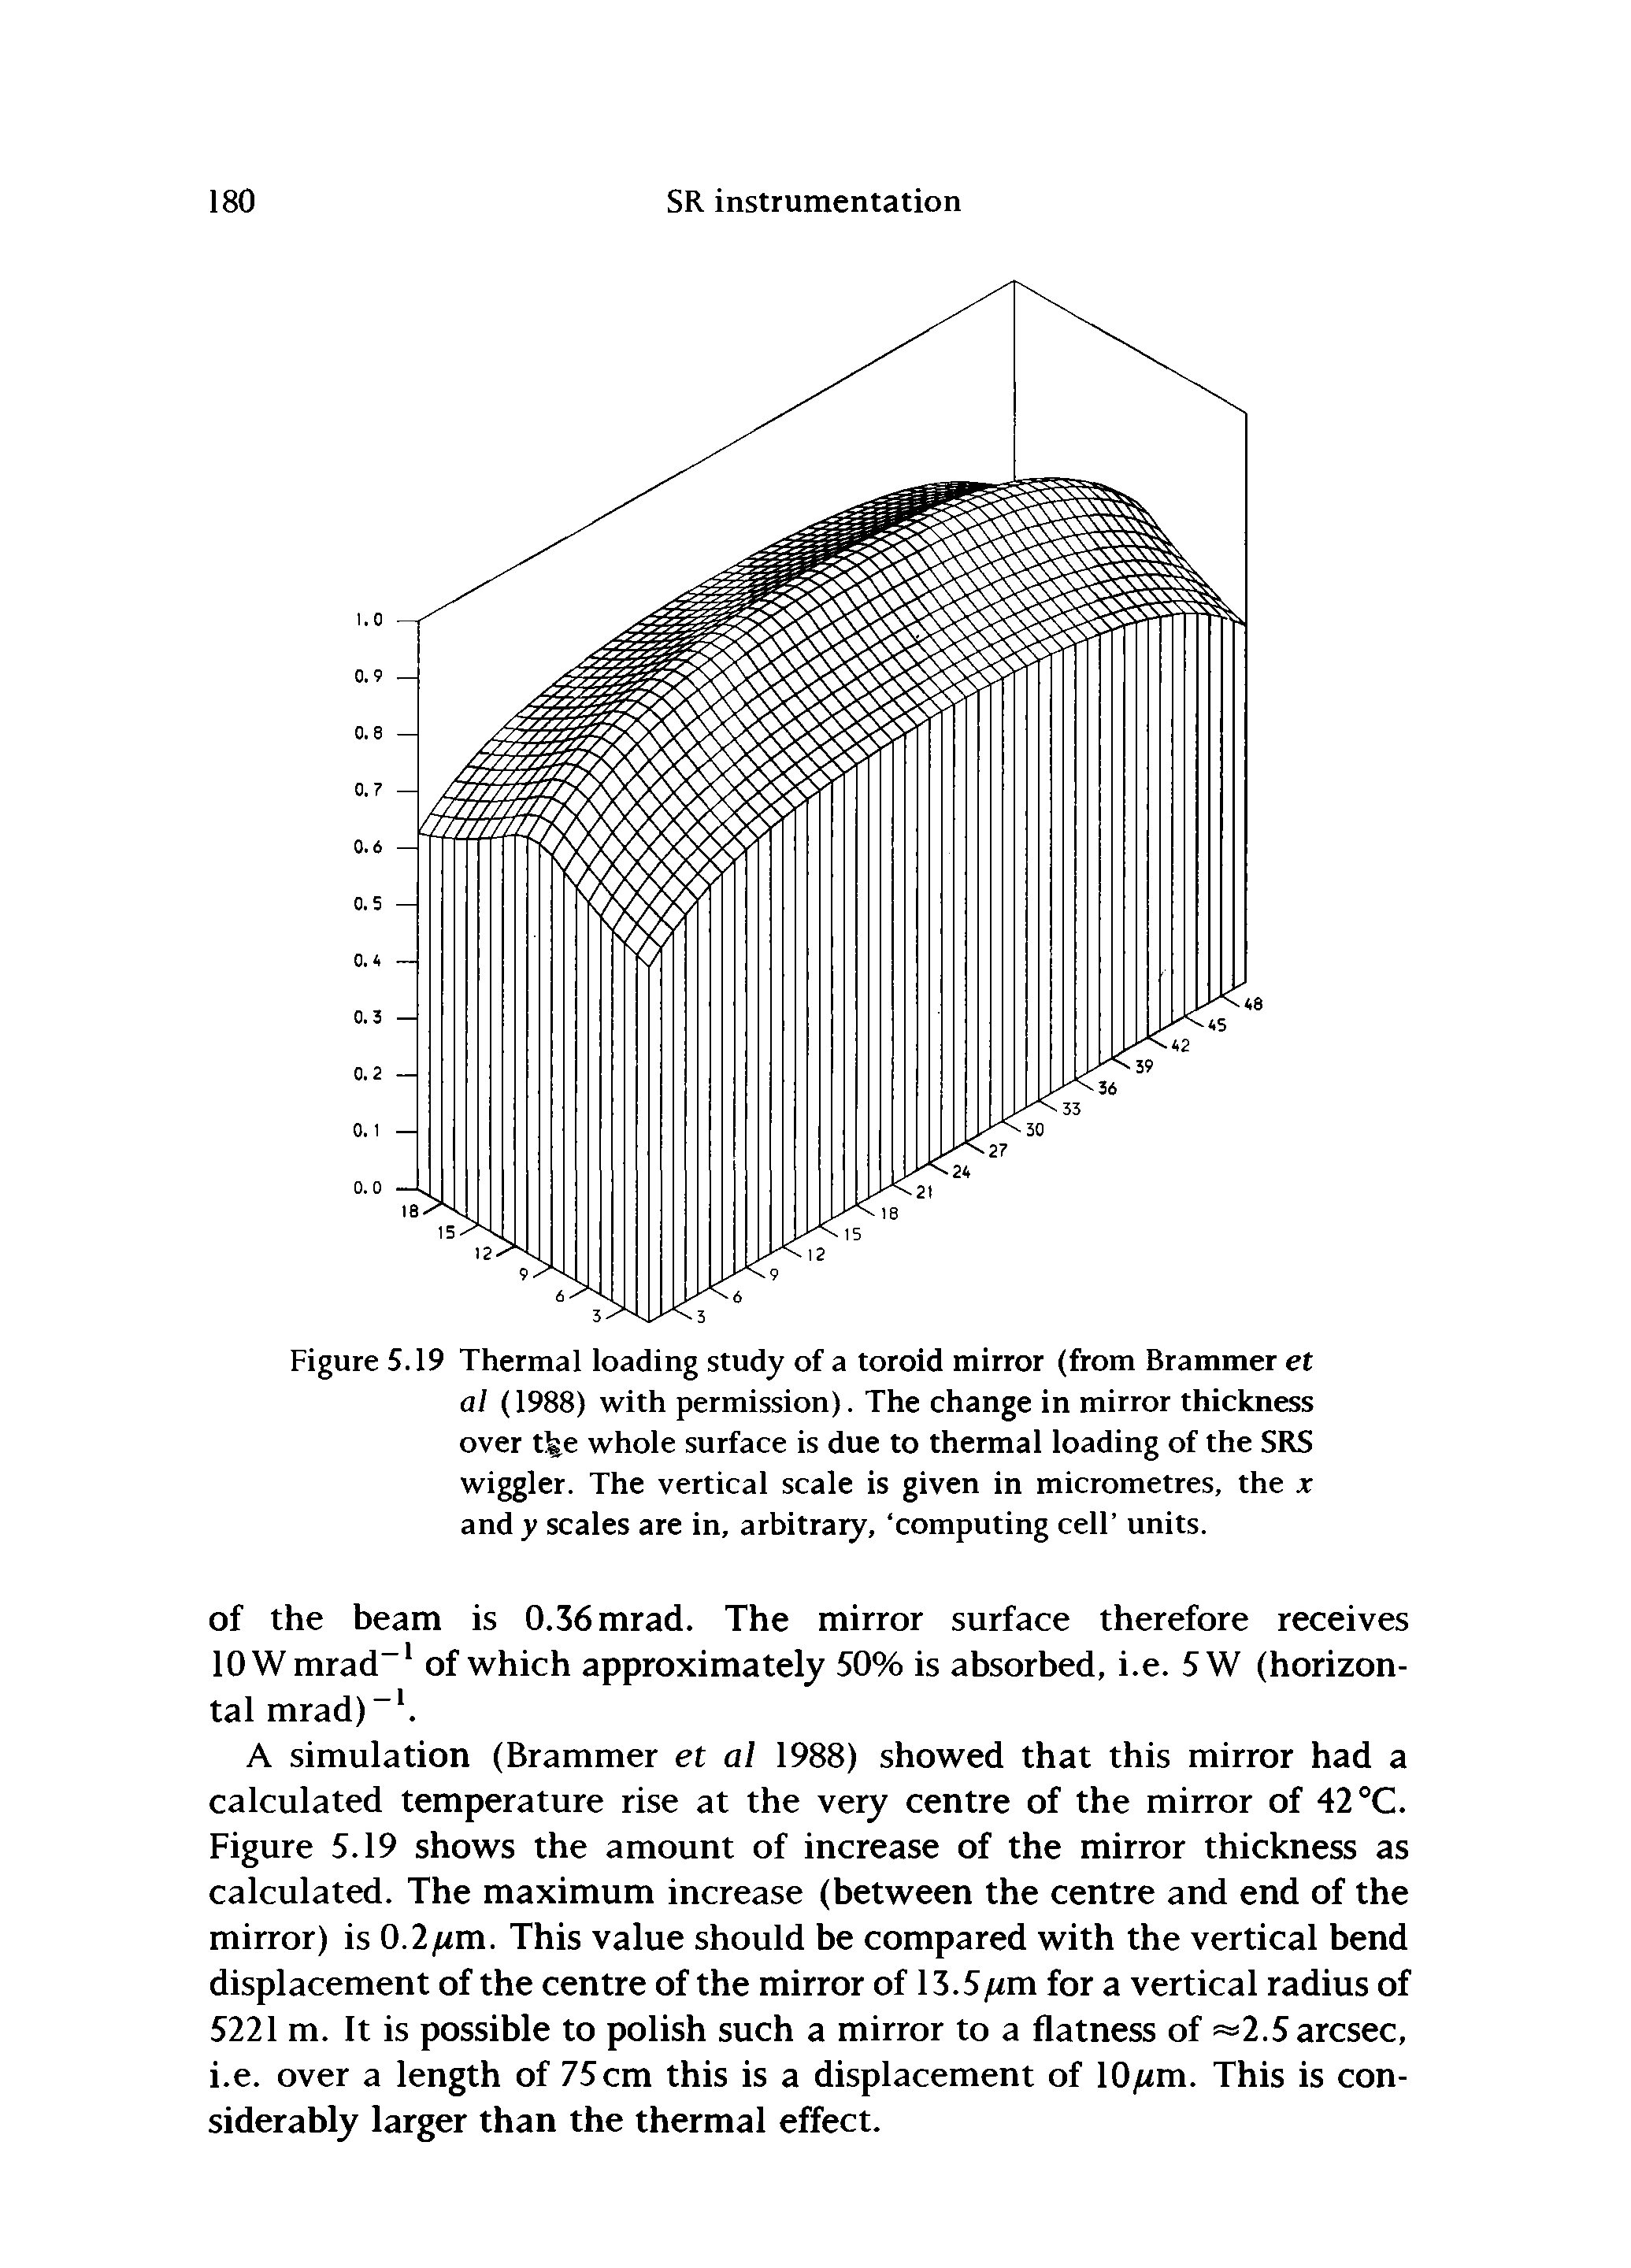 Figure 5.19 Thermal loading study of a toroid mirror (from Brammer et al (1988) with permission). The change in mirror thickness over tfee whole surface is due to thermal loading of the SRS wiggler. The vertical scale is given in micrometres, the x and y scales are in, arbitrary, computing cell units.